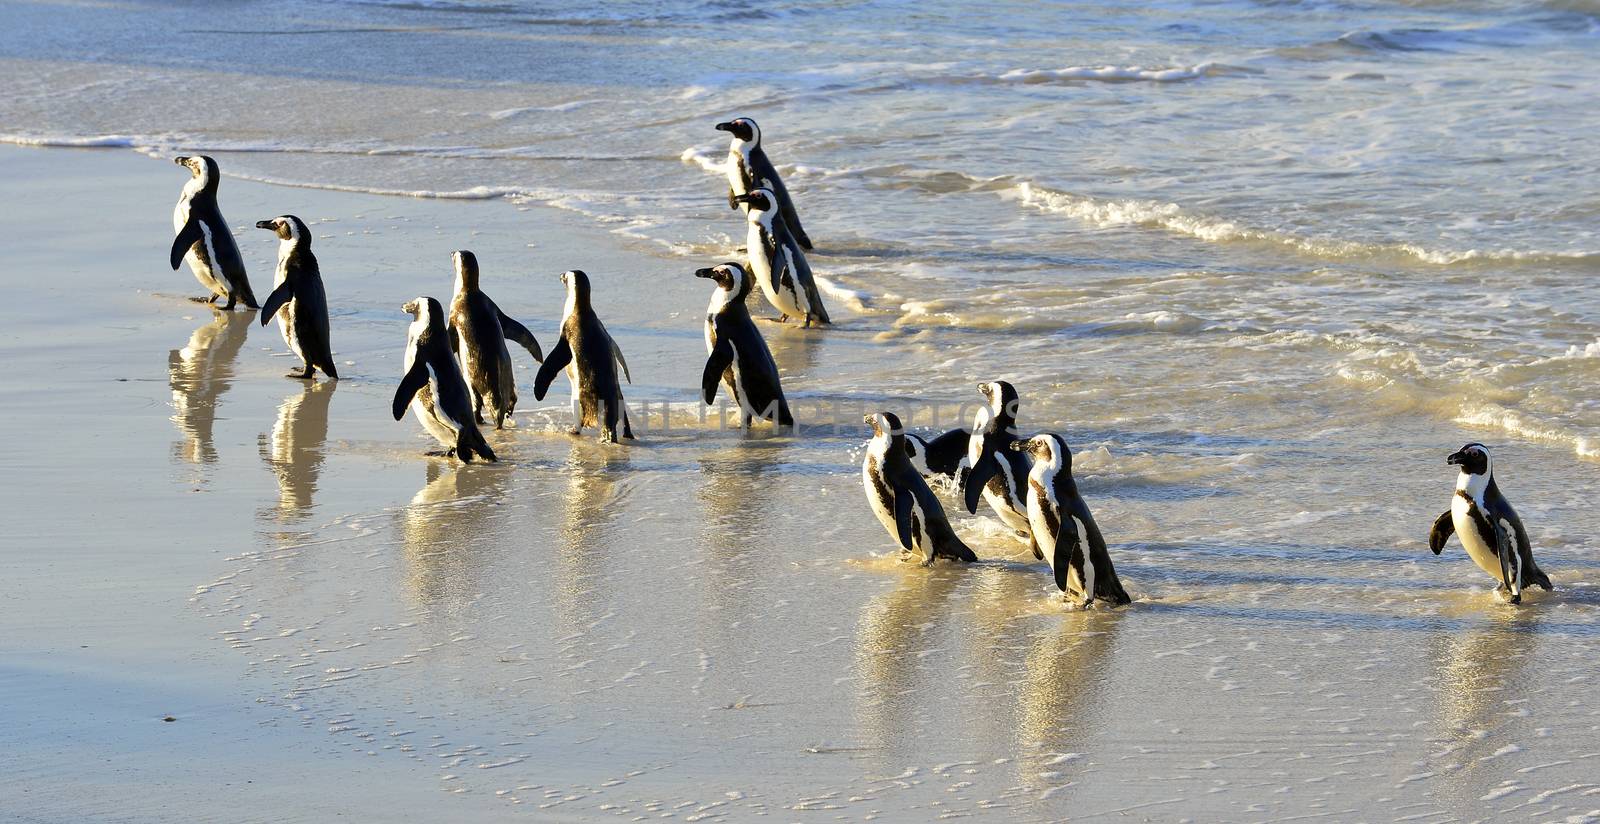 Walking  African penguins (spheniscus demersus) at the Beach. South Africa